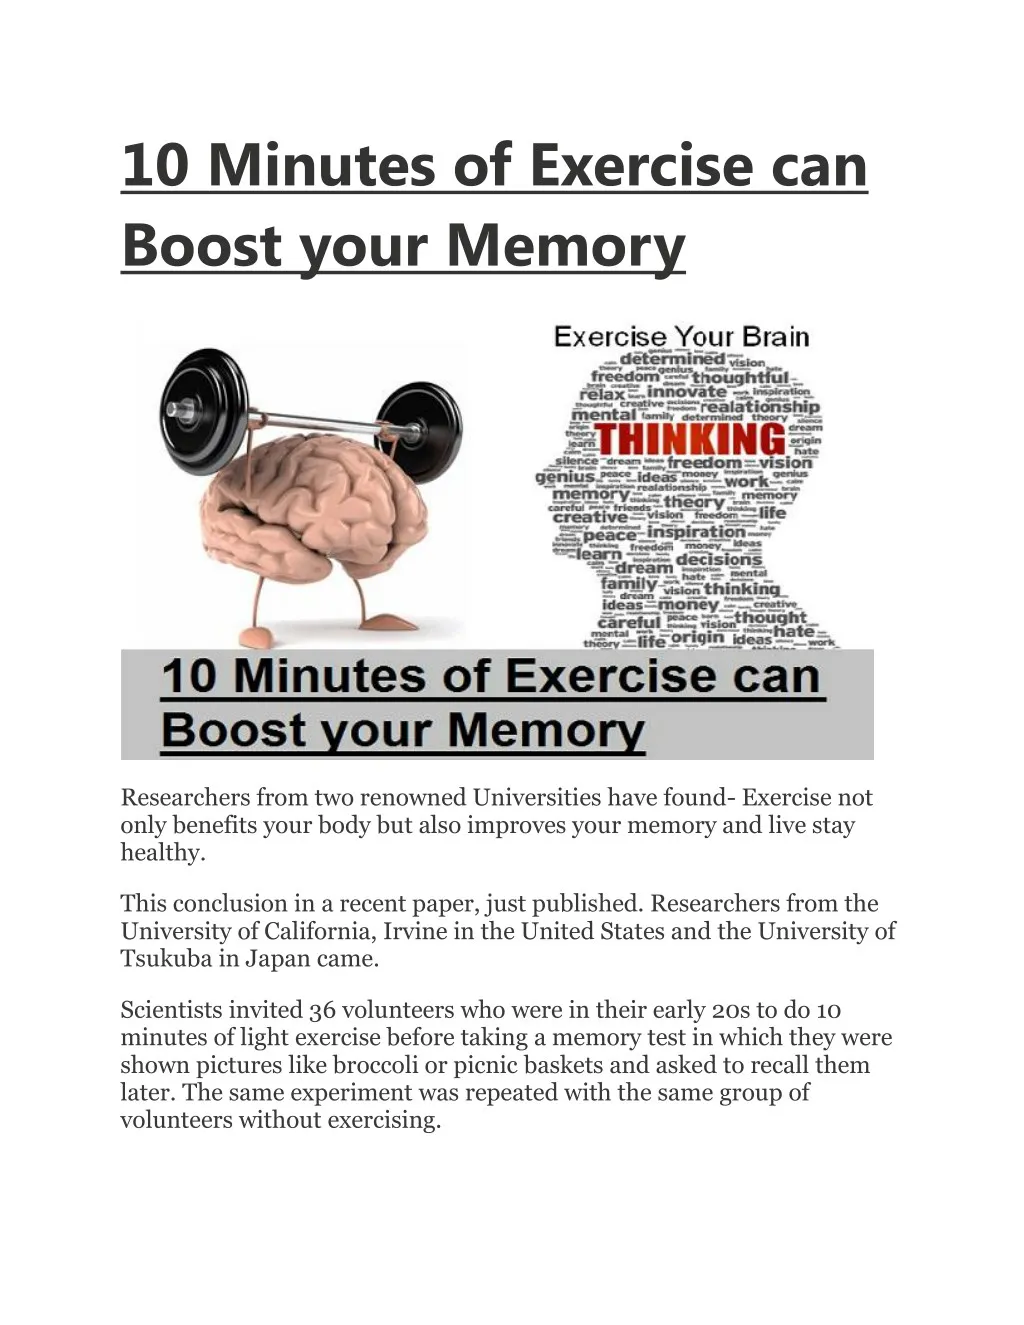 10 minutes of exercise can boost your memory